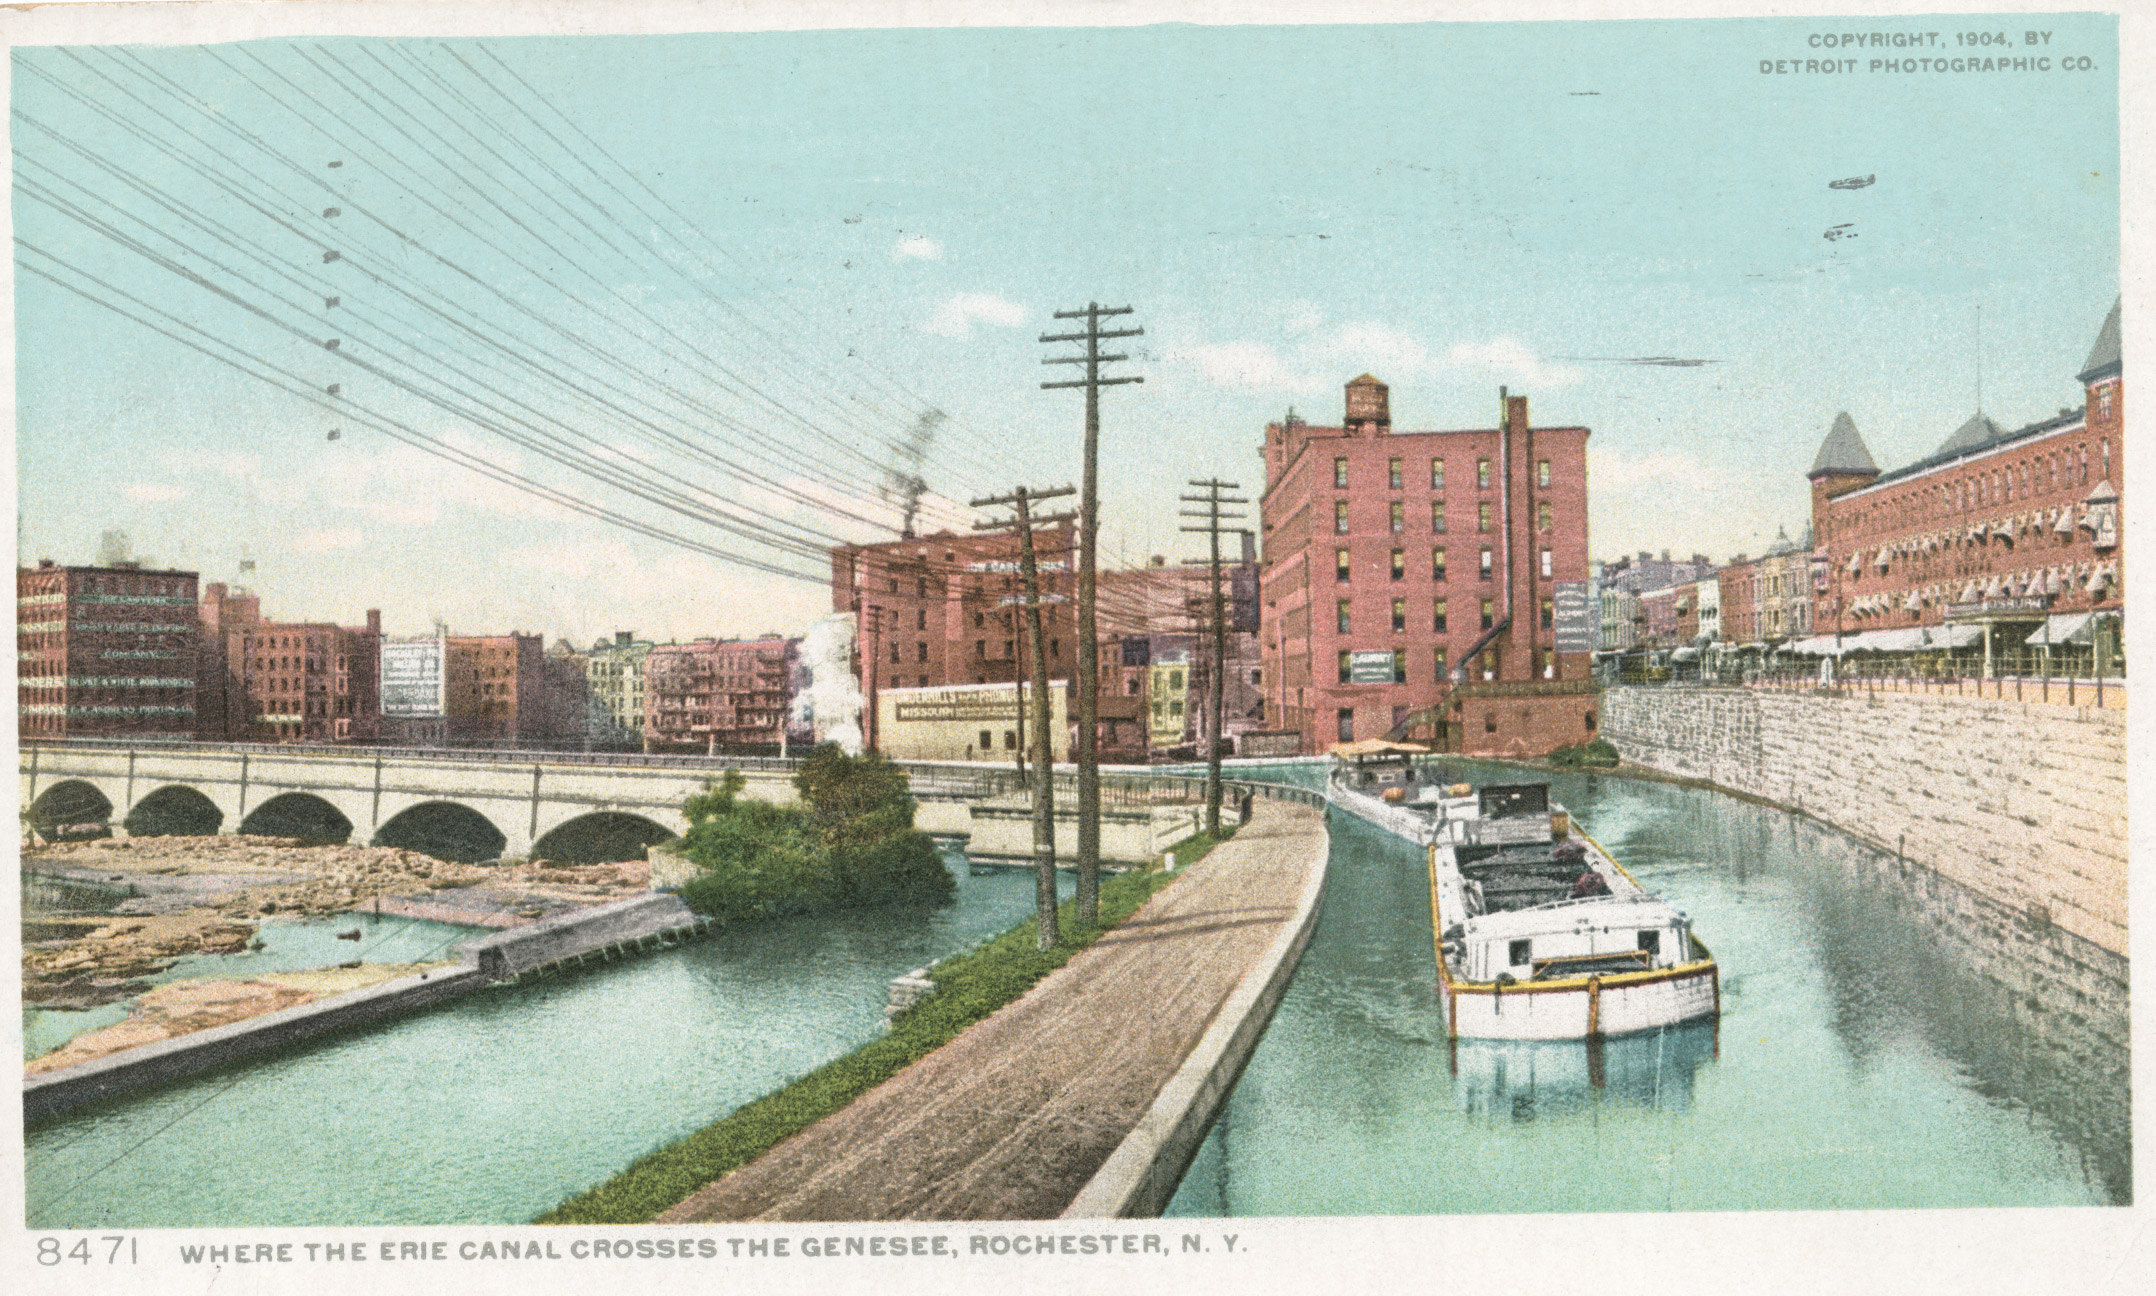 Where the Erie Canal crosses the Genesee, Rochester, NY. (From The New York Public Library)